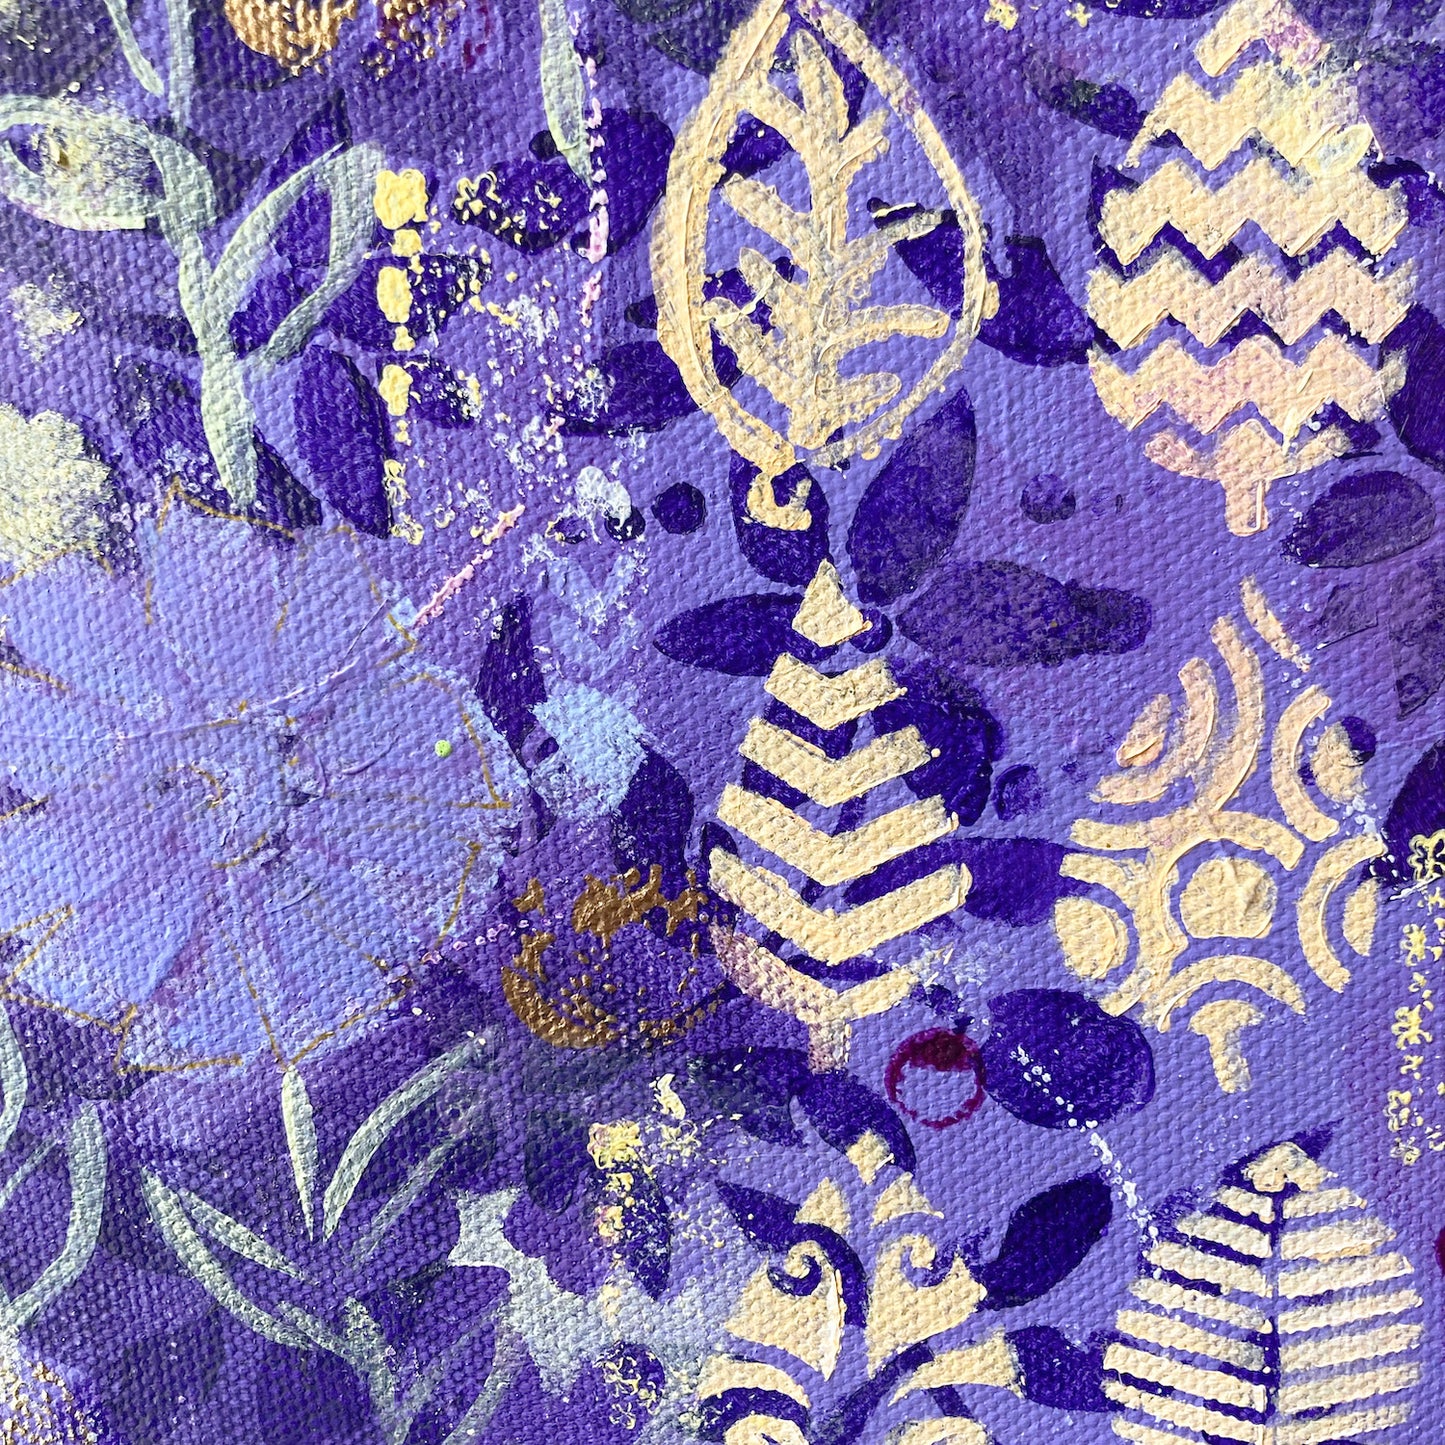 detail photo of original abstract acrylic floral painting purple flowers and green leaves on purple background cream leaf shapes mysterious and vibrant 